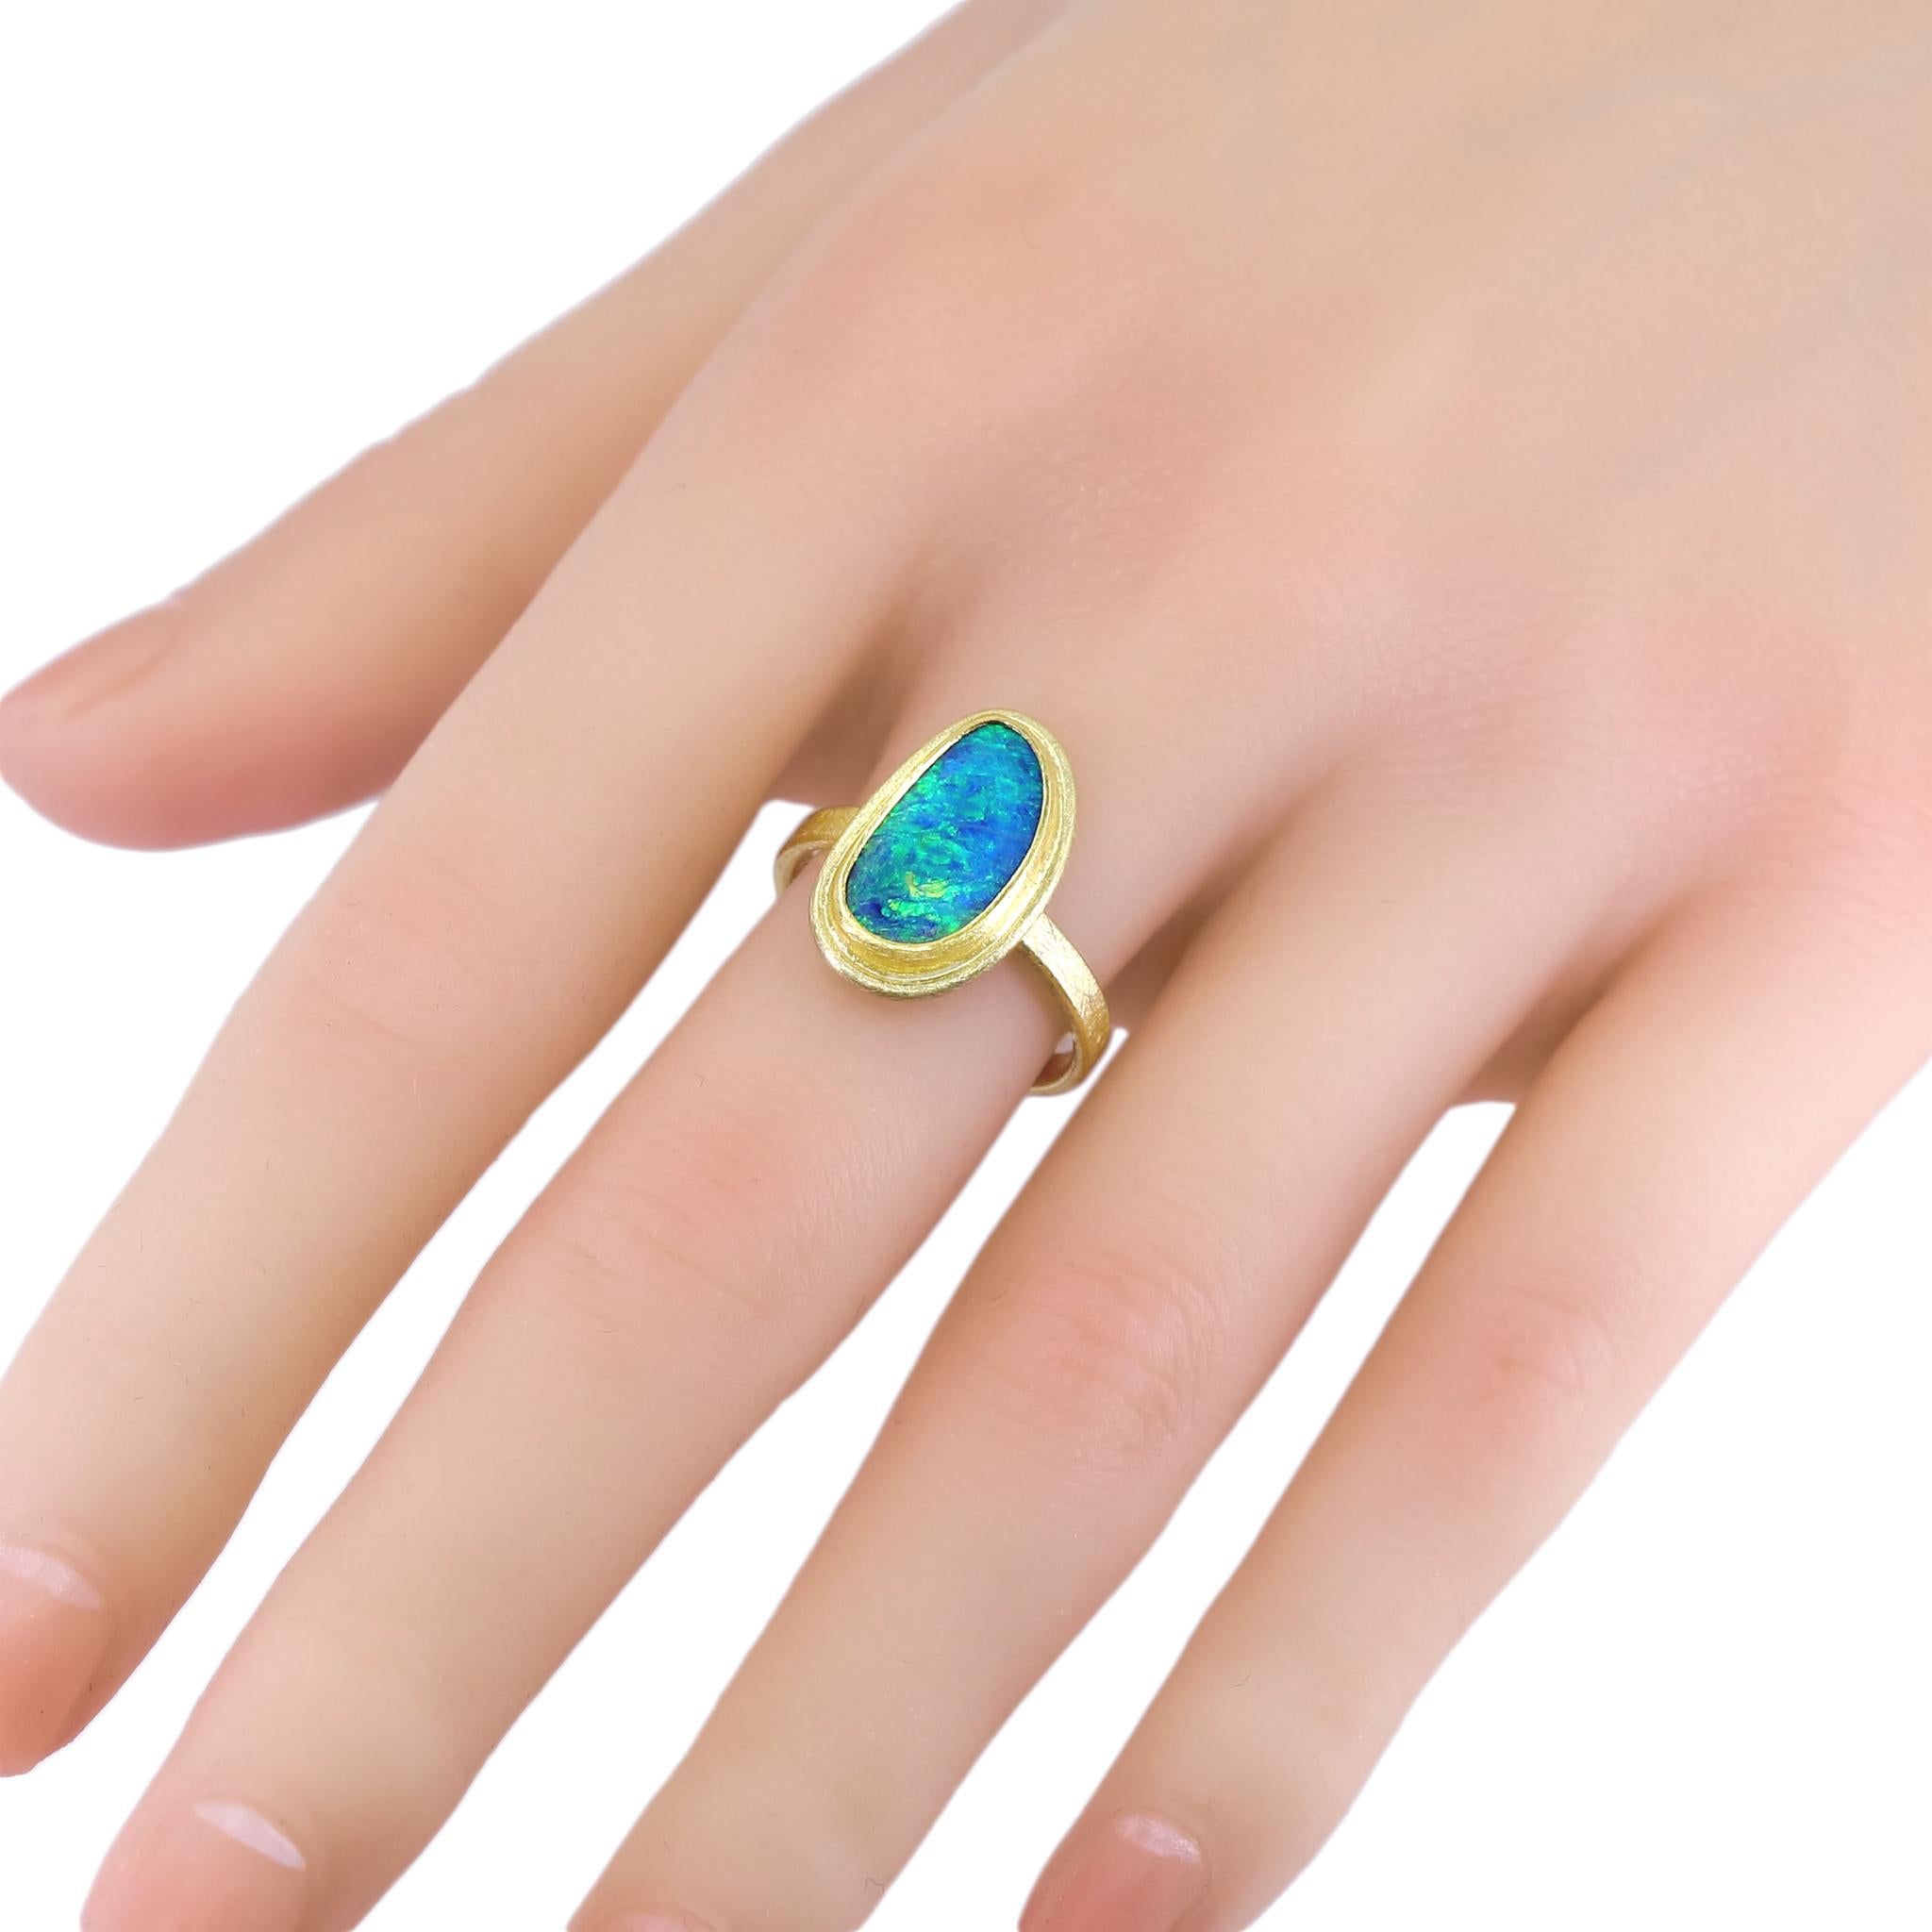 Framed Solitaire Ring handcrafted by acclaimed jewelry maker Petra Class featuring a gorgeous vibrant blue Australian opal doublet (15mm x 9mm) with strong electric green fire complemented by flashes of orange and violet, bezel-set and framed in the